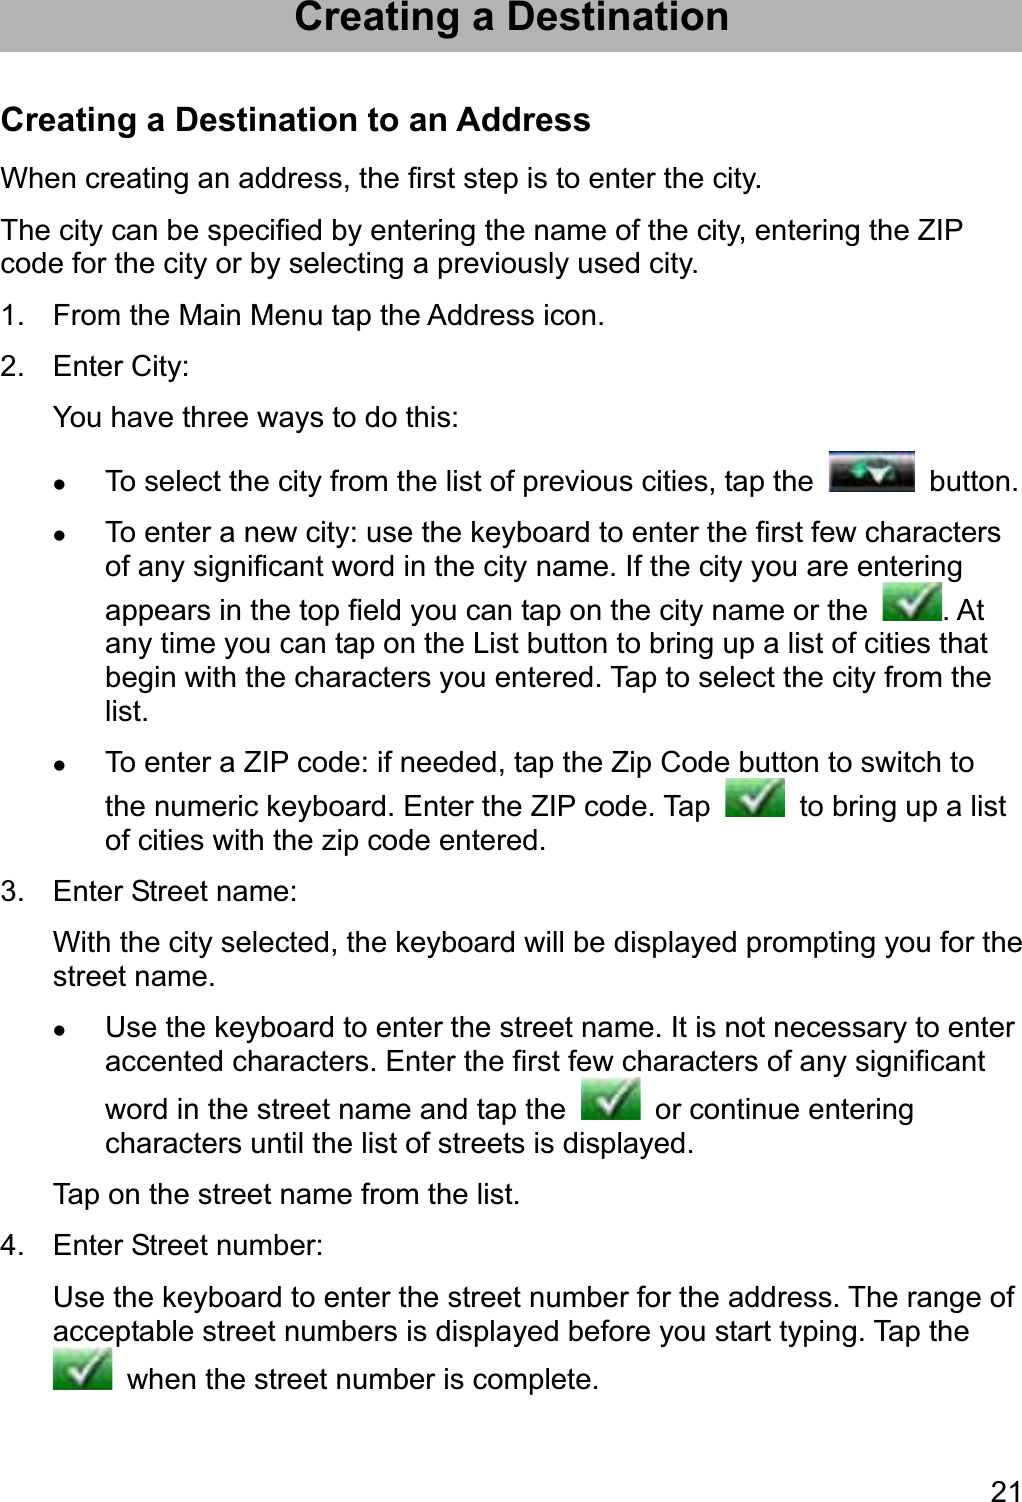 21Creating a Destination Creating a Destination to an Address When creating an address, the first step is to enter the city. The city can be specified by entering the name of the city, entering the ZIP code for the city or by selecting a previously used city. 1.  From the Main Menu tap the Address icon. 2. Enter City: You have three ways to do this: zTo select the city from the list of previous cities, tap the   button. zTo enter a new city: use the keyboard to enter the first few characters of any significant word in the city name. If the city you are entering appears in the top field you can tap on the city name or the  . At any time you can tap on the List button to bring up a list of cities that begin with the characters you entered. Tap to select the city from the list.zTo enter a ZIP code: if needed, tap the Zip Code button to switch to the numeric keyboard. Enter the ZIP code. Tap    to bring up a list of cities with the zip code entered. 3.  Enter Street name: With the city selected, the keyboard will be displayed prompting you for the street name. zUse the keyboard to enter the street name. It is not necessary to enter accented characters. Enter the first few characters of any significant word in the street name and tap the   or continue entering characters until the list of streets is displayed. Tap on the street name from the list. 4.  Enter Street number: Use the keyboard to enter the street number for the address. The range of acceptable street numbers is displayed before you start typing. Tap the   when the street number is complete. 